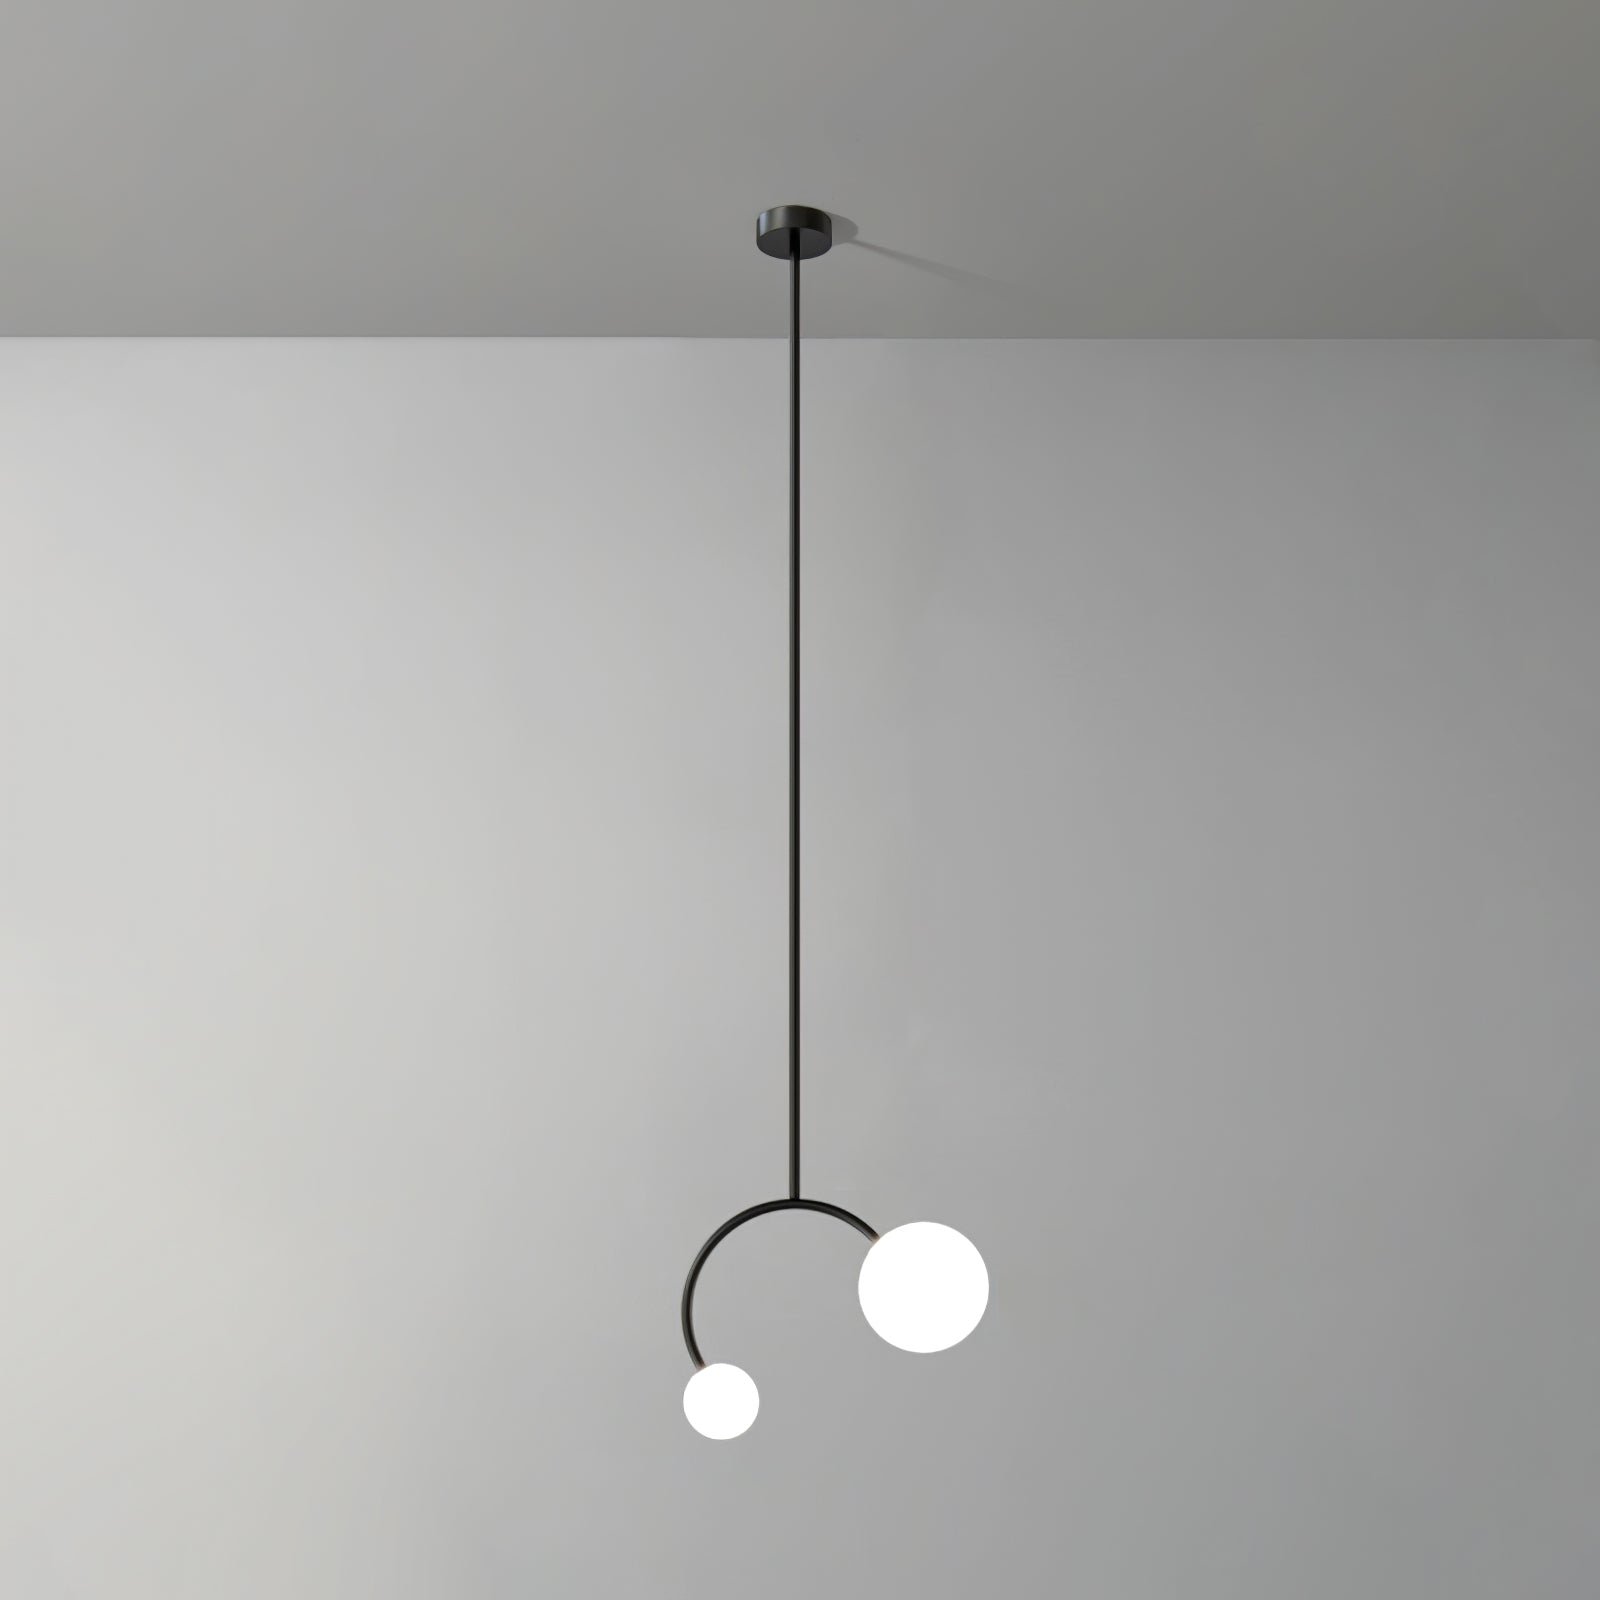 Black and White Digon Balance Pendant Lamp in Diameter 13.4 inches x Height 11 inches (34cm x 28cm)